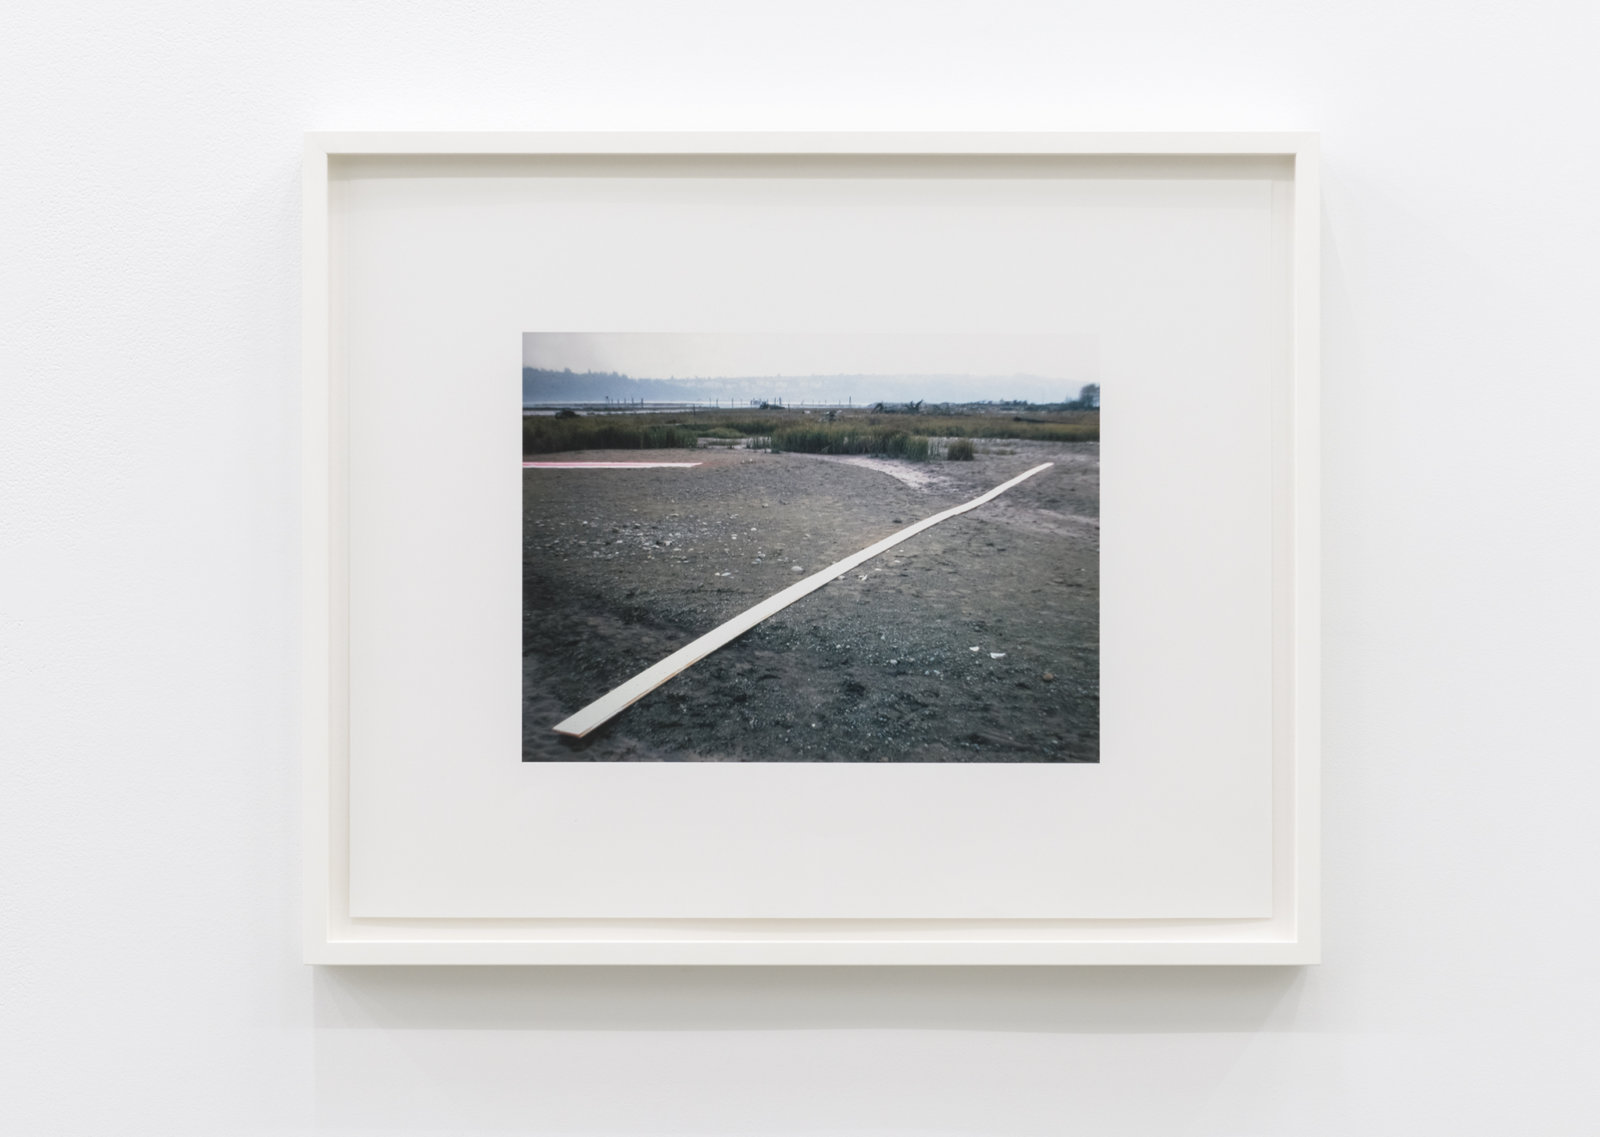 Ian Wallace, White Line (First Version 1969), 1969–2012, framed inkjet print, 22 x 27 in. (60 x 69 cm)